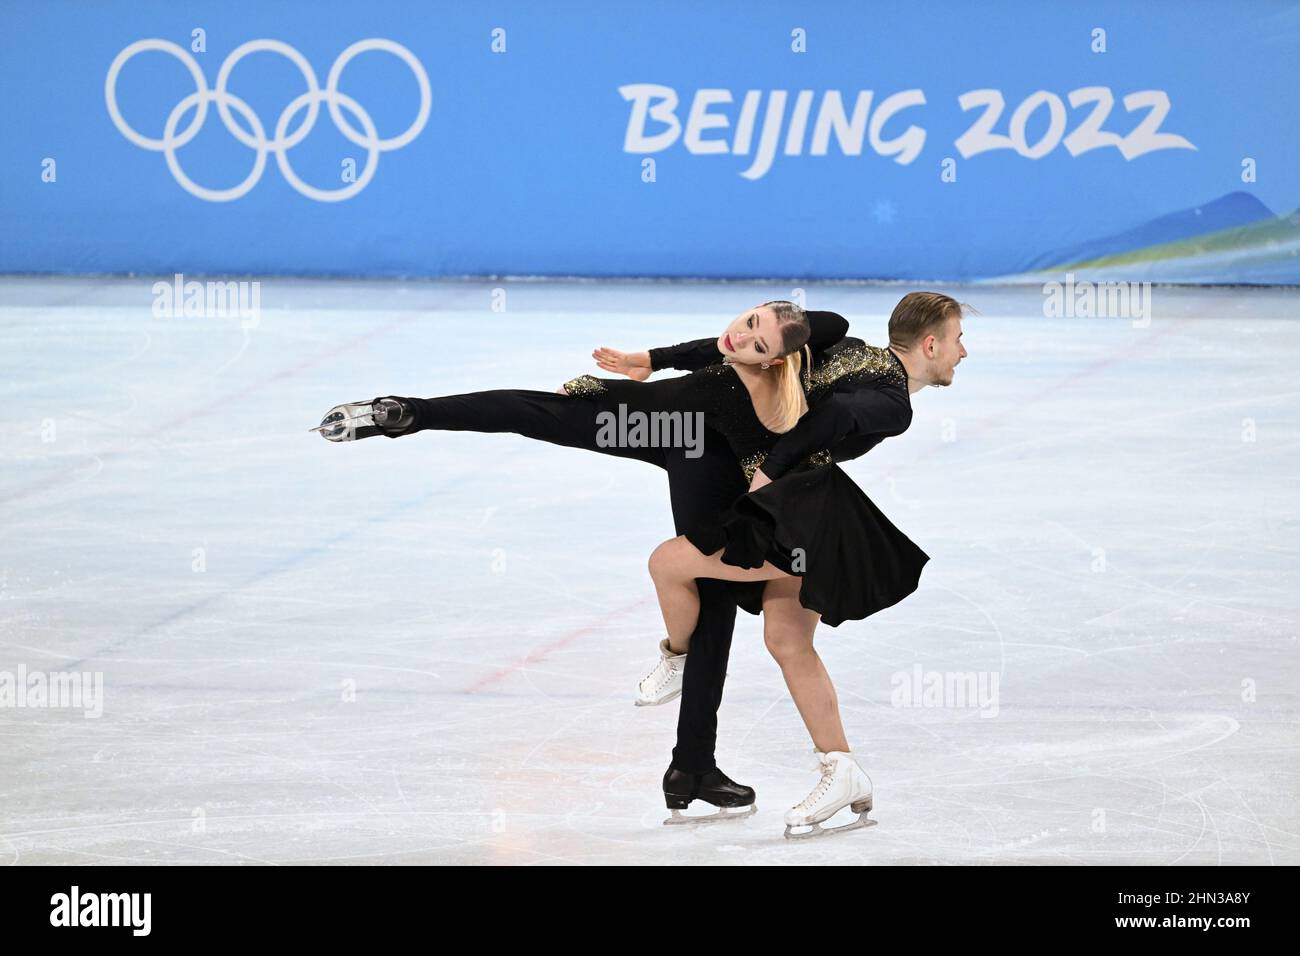 Beijing, China. 14th Feb, 2022. Natalie Taschlerova (front) and Filip Taschler of Czech Republic perform during the figure skating ice dance free dance match of Beijing 2022 Winter Olympics at Capital Indoor Stadium in Beijing, capital of China, Feb. 14, 2022. Credit: Wang Jianwei/Xinhua/Alamy Live News Stock Photo